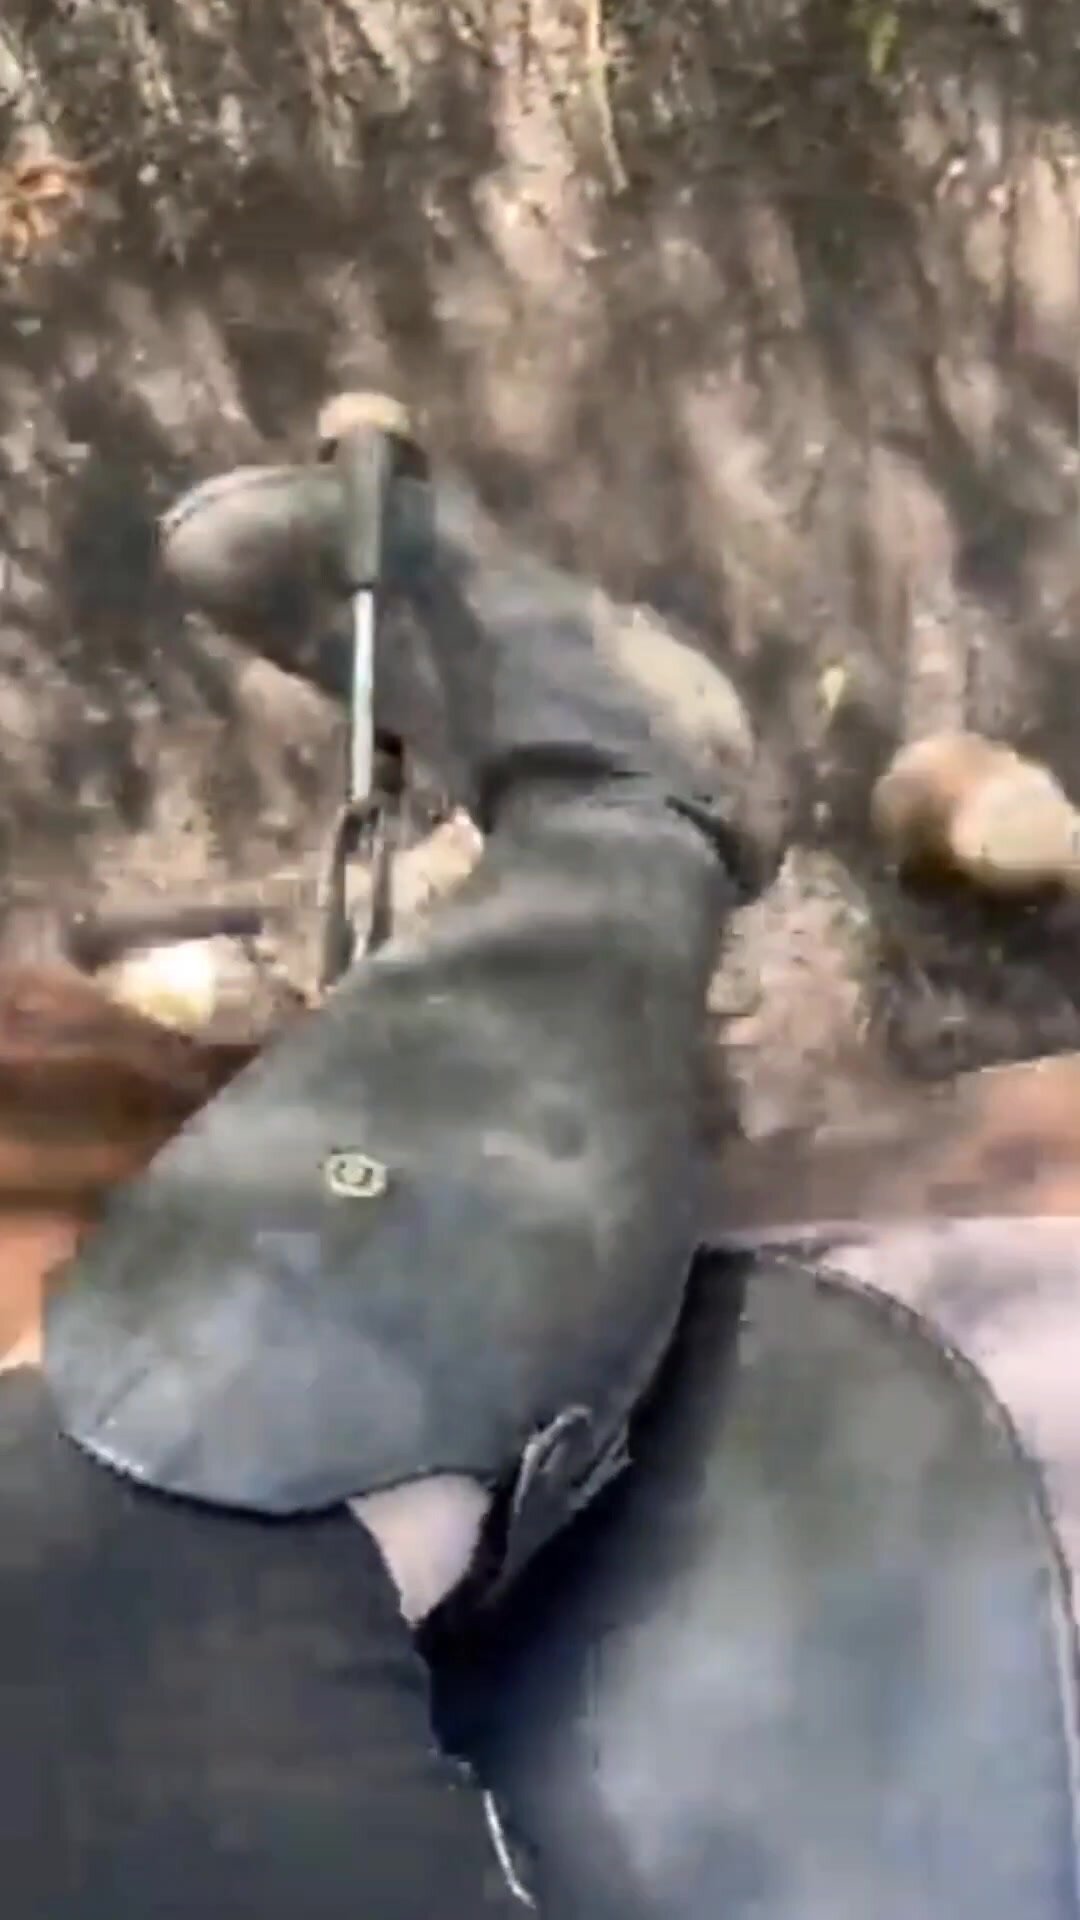 Horse riding with dirty boots